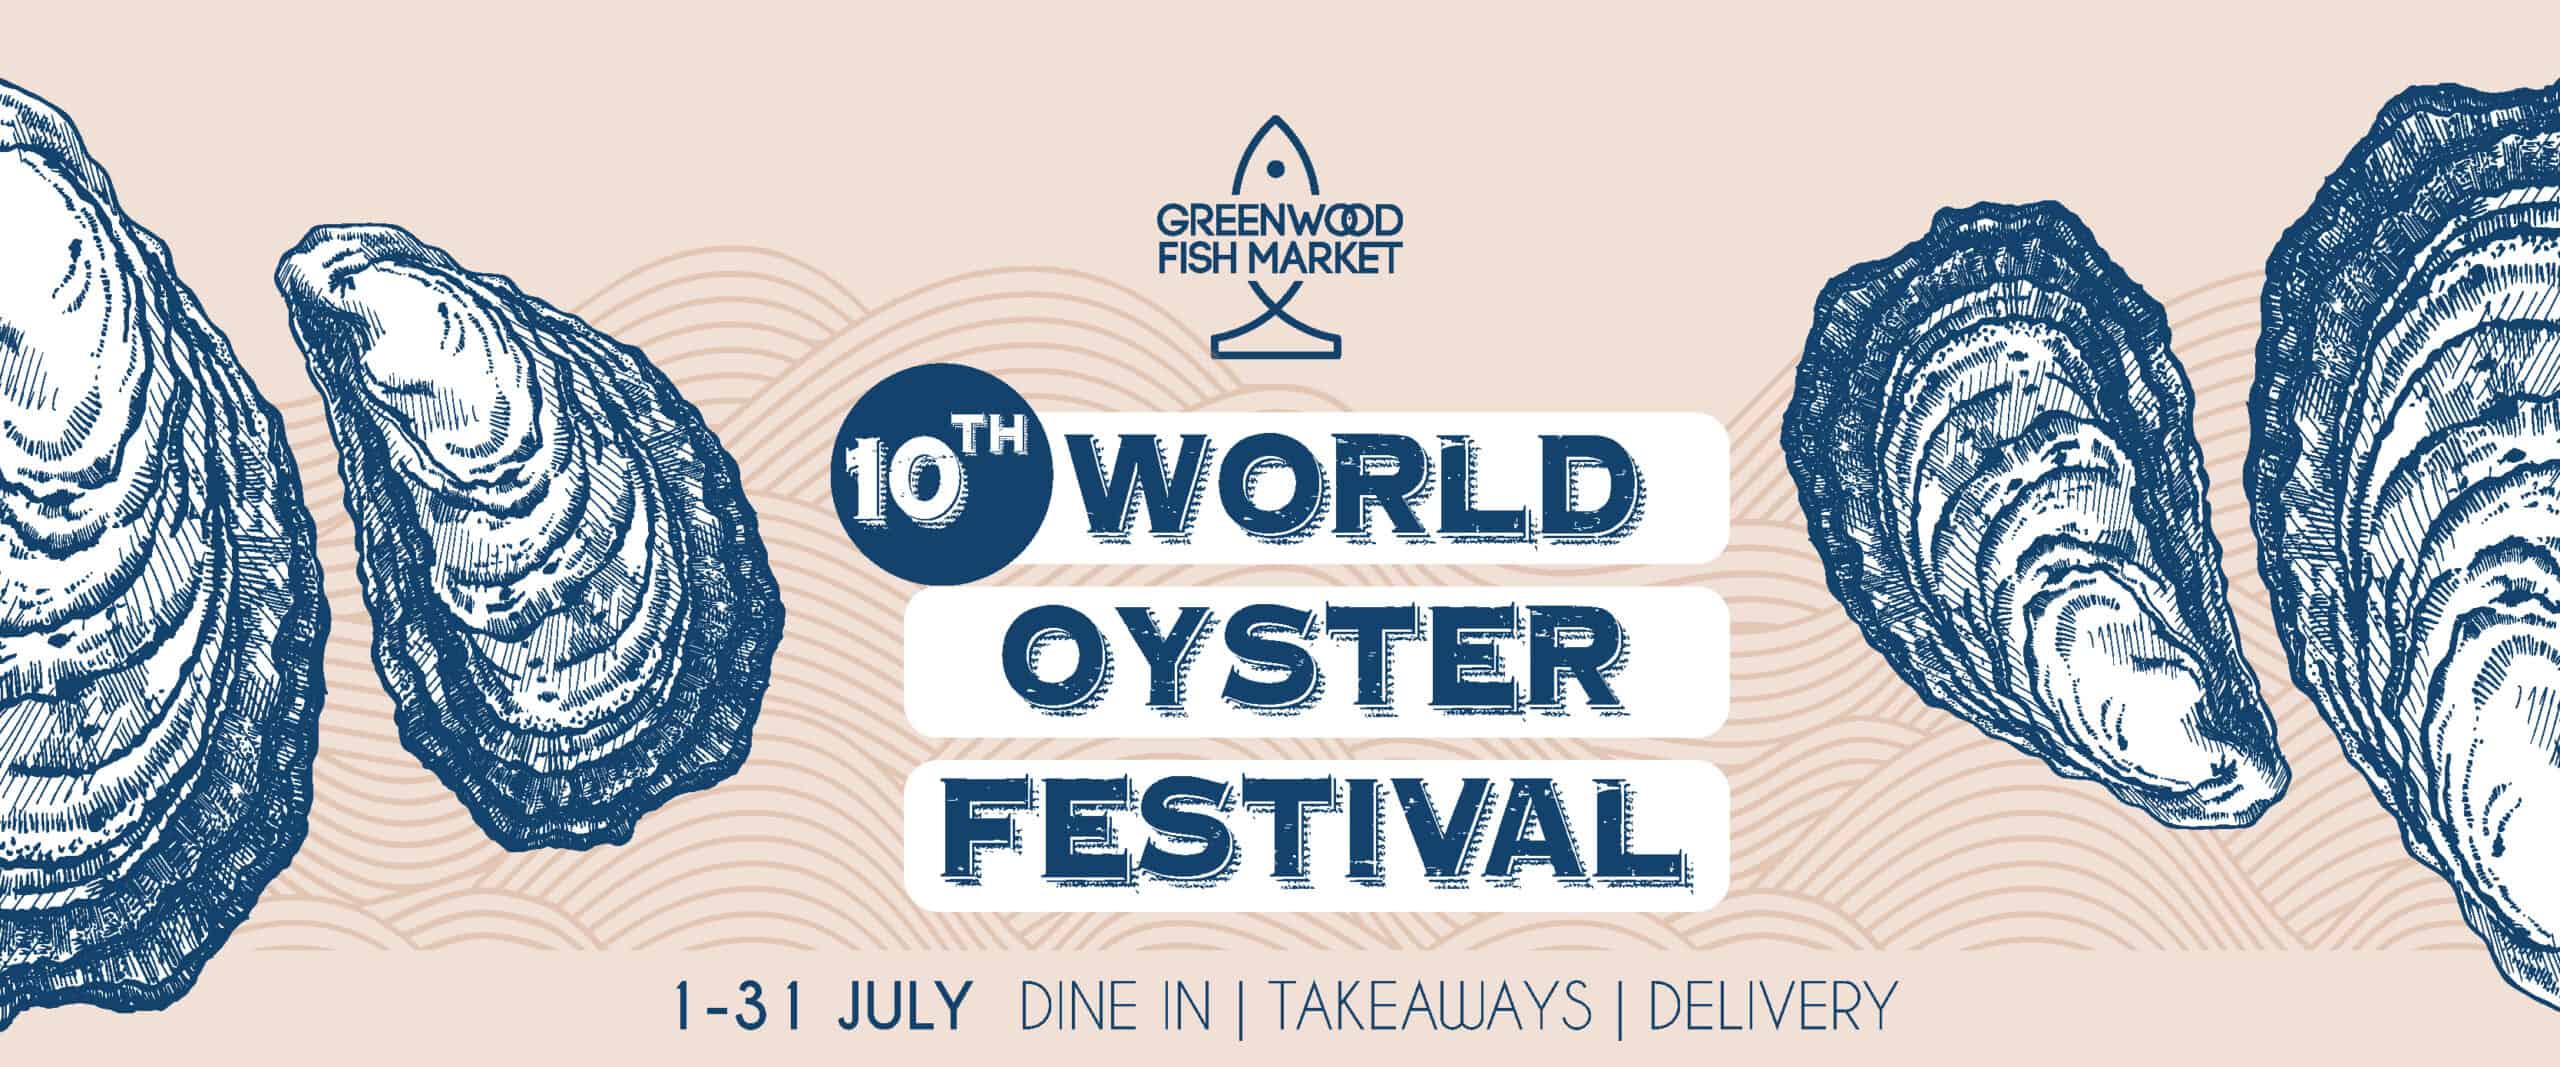 10th World Oyster Festival - City Nomads